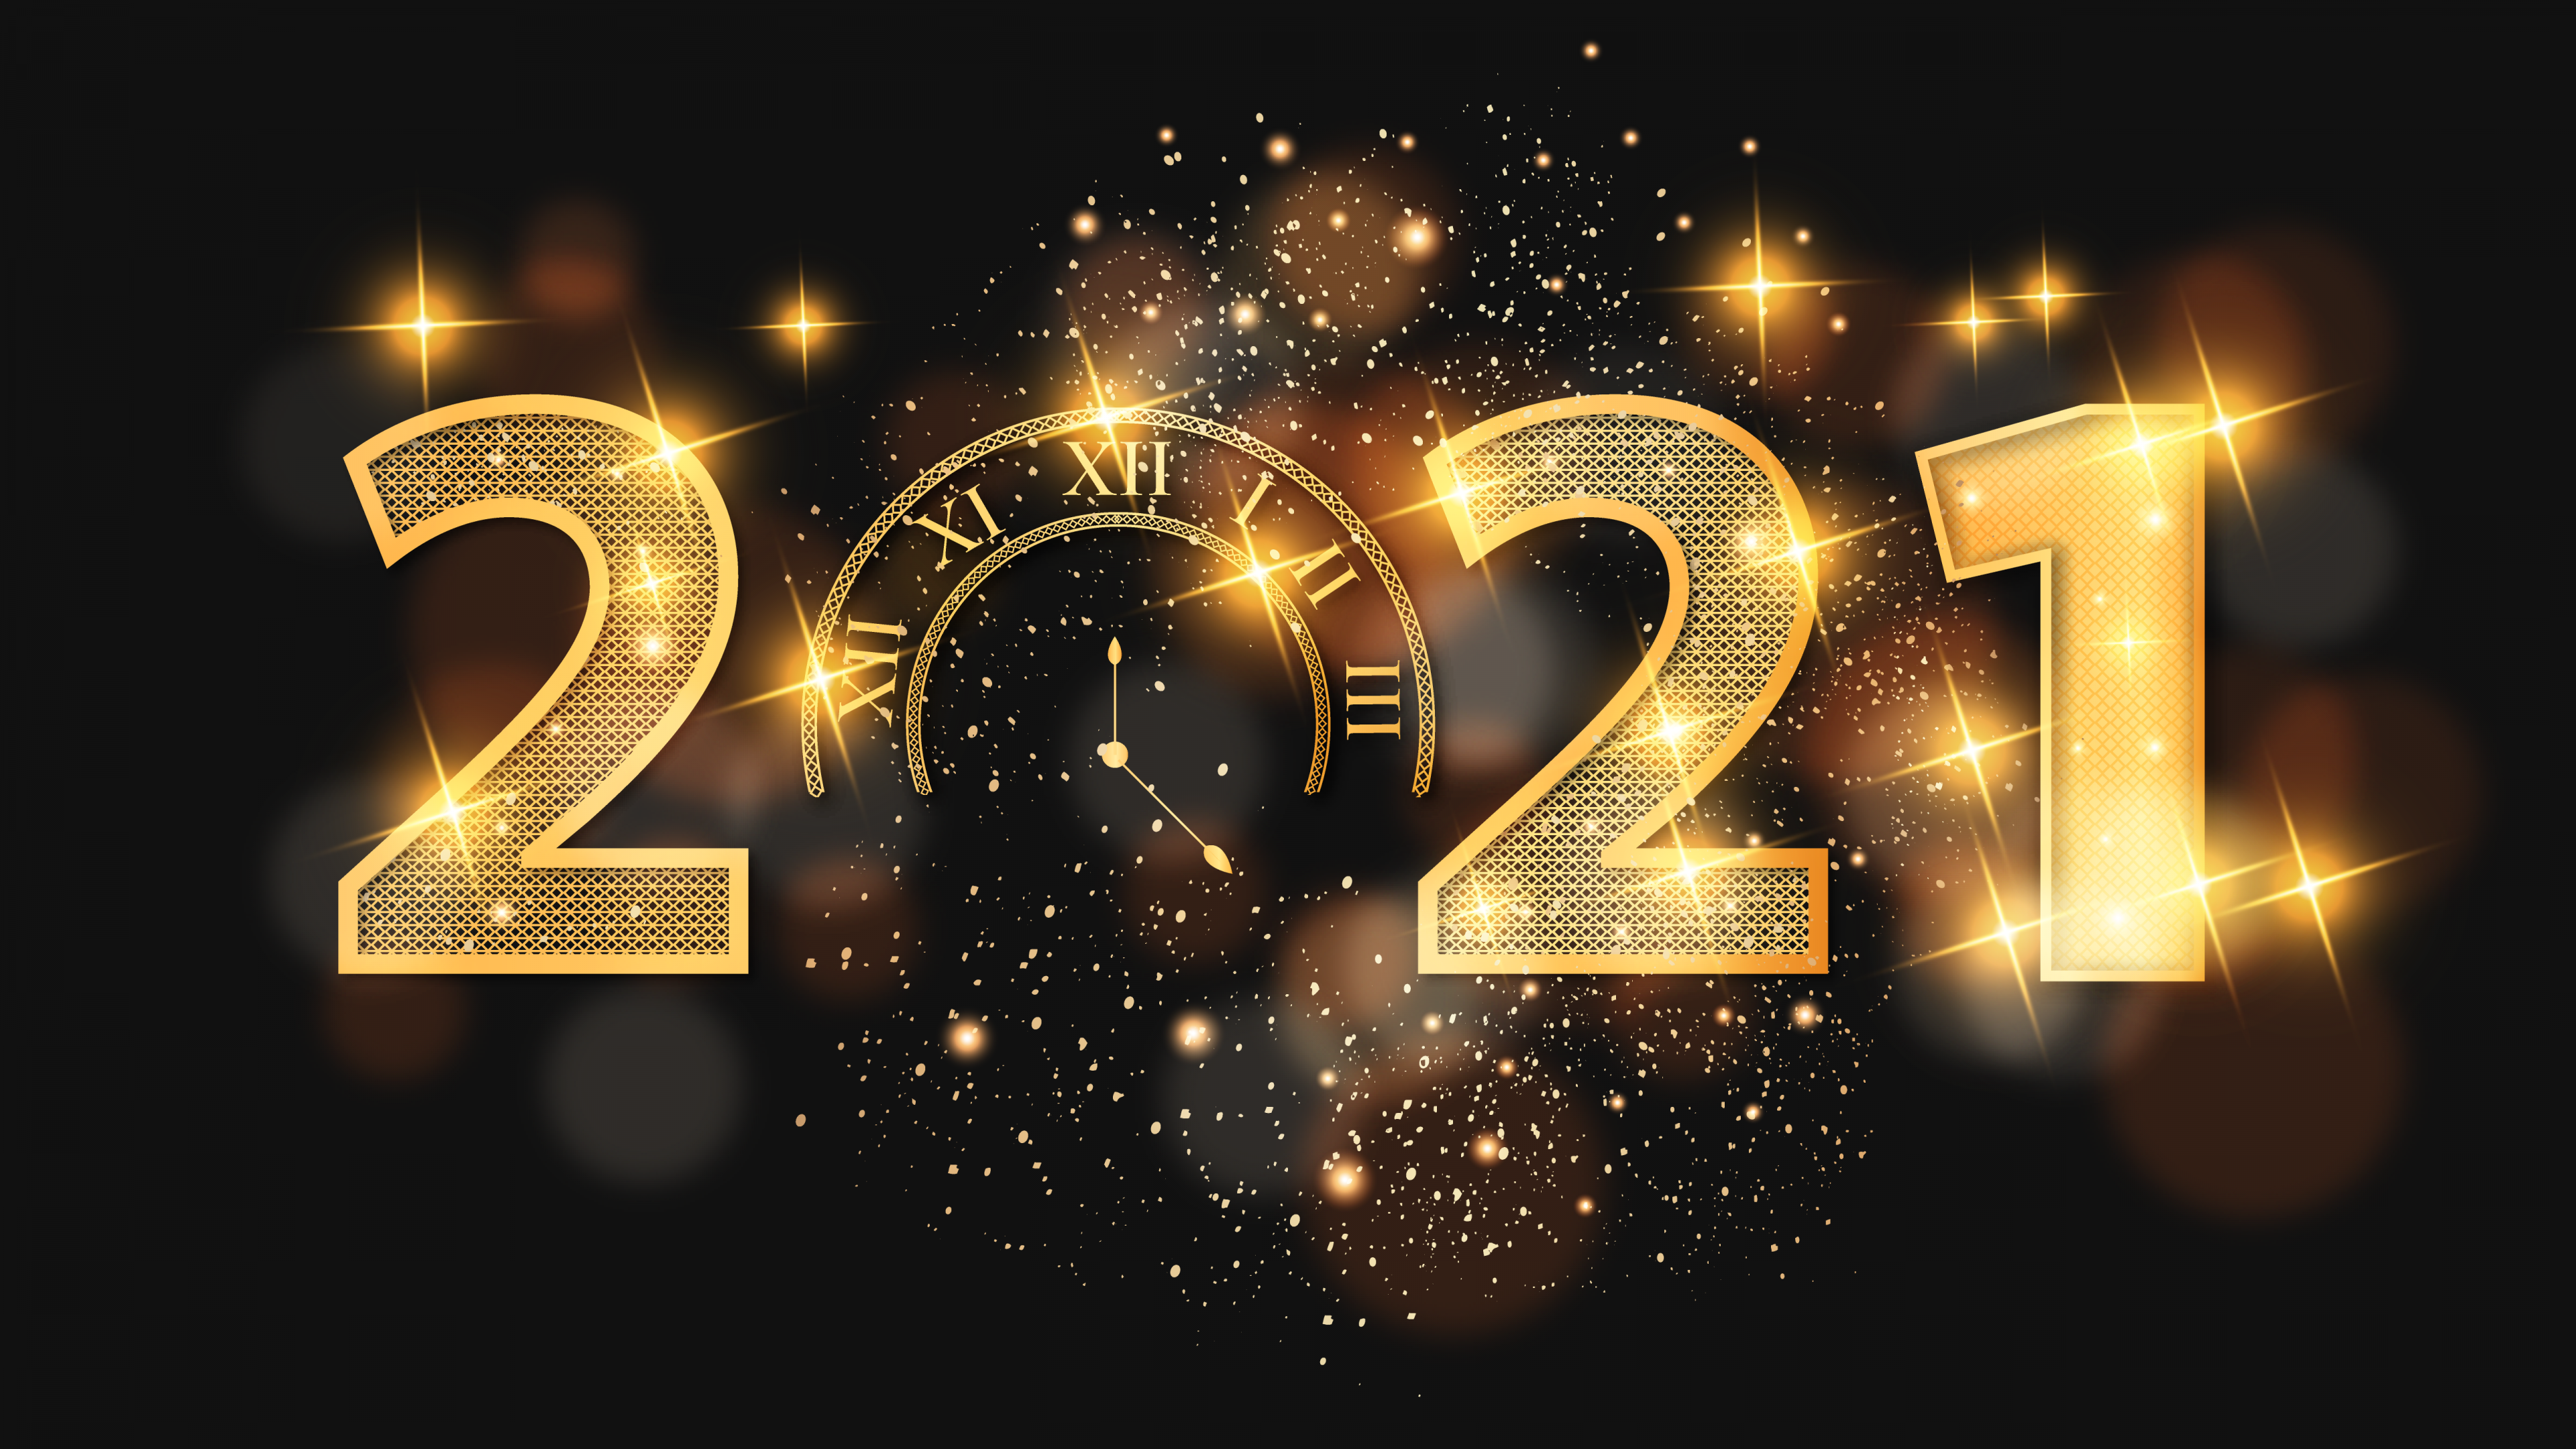 2021-new-year-happy-new-year-golden-letters-dark-background-3840x2160-3500.png